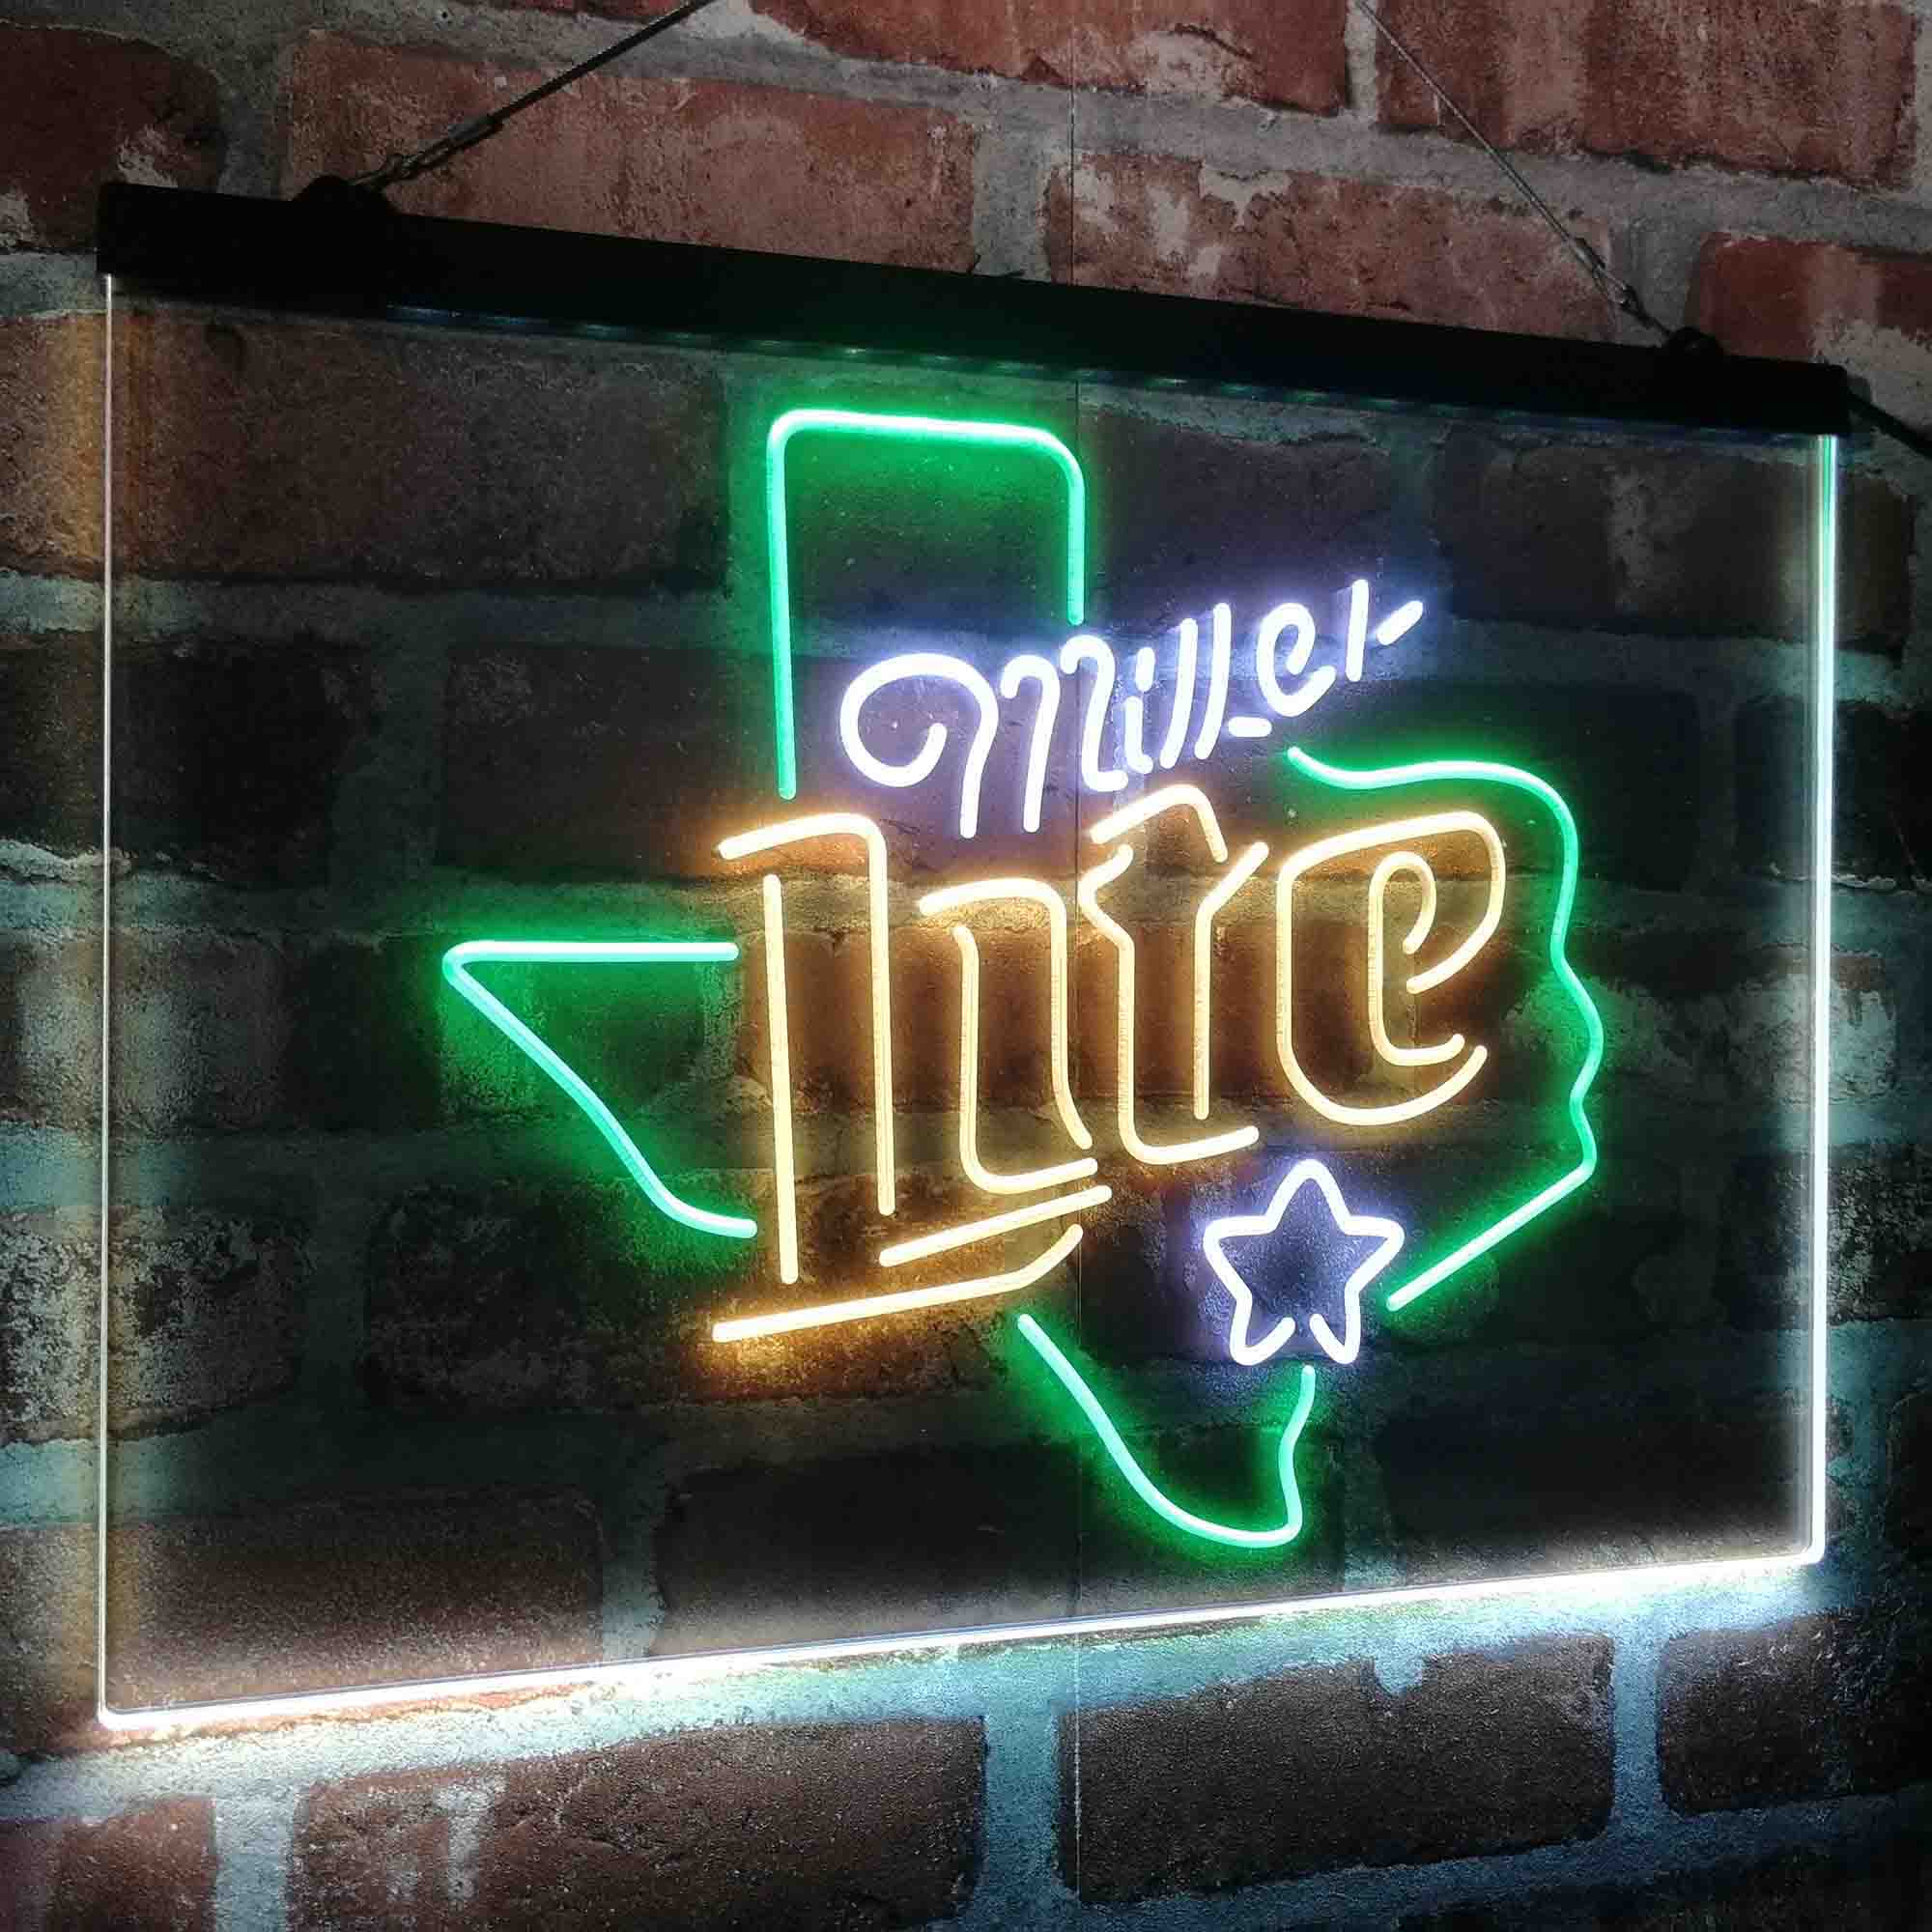 Miller Star Texas Beer Neon LED Sign 3 Colors